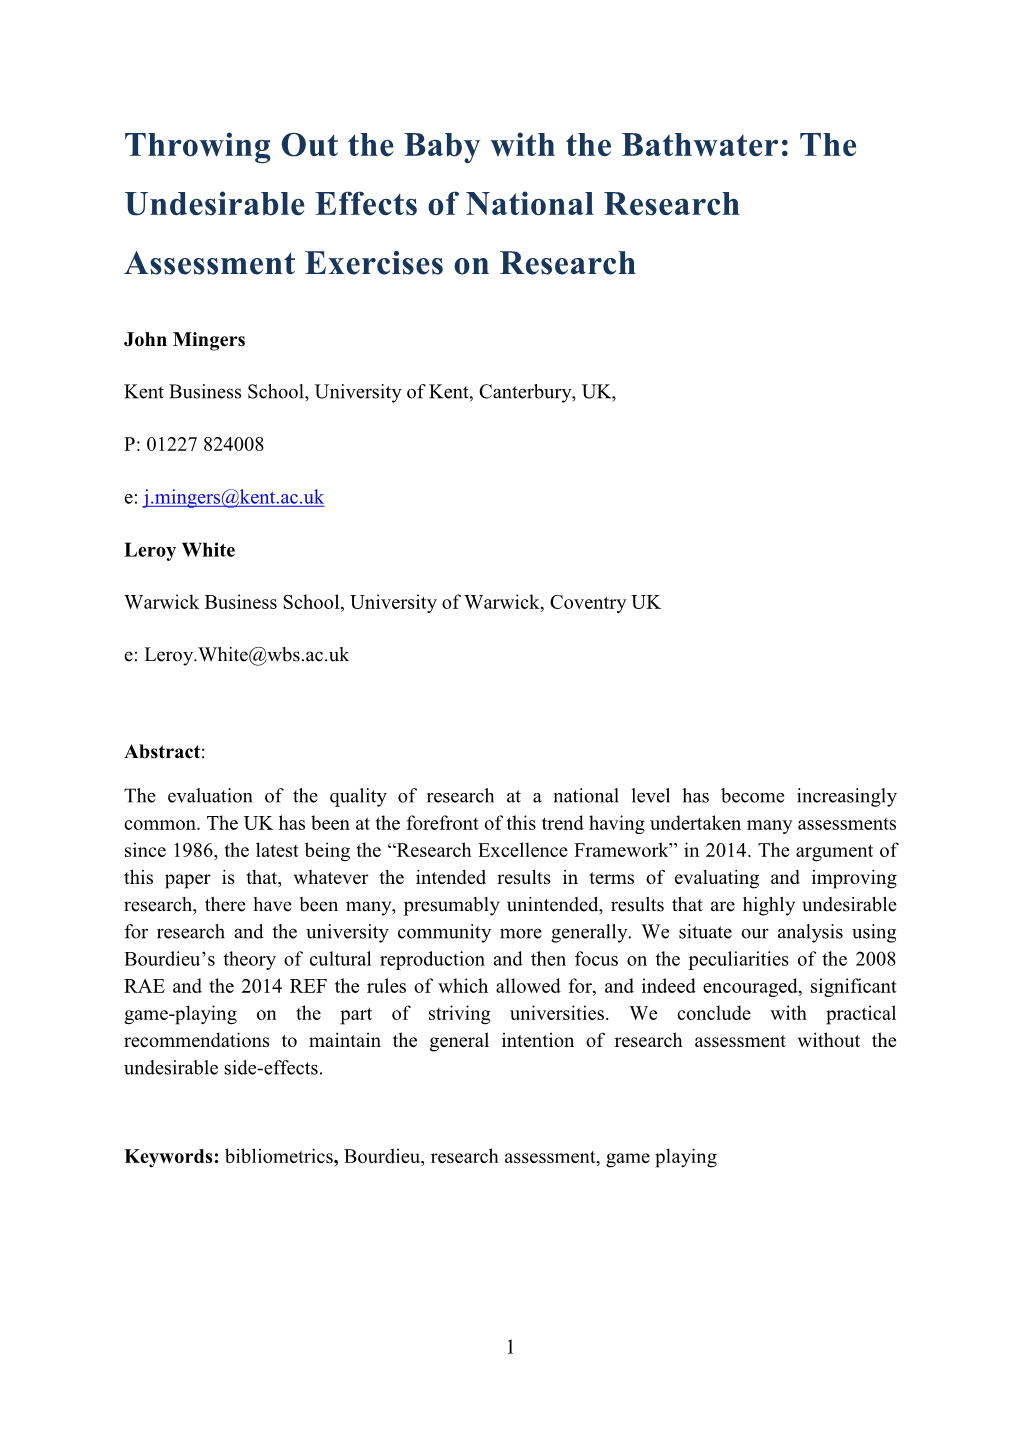 Throwing out the Baby with the Bathwater: the Undesirable Effects of National Research Assessment Exercises on Research